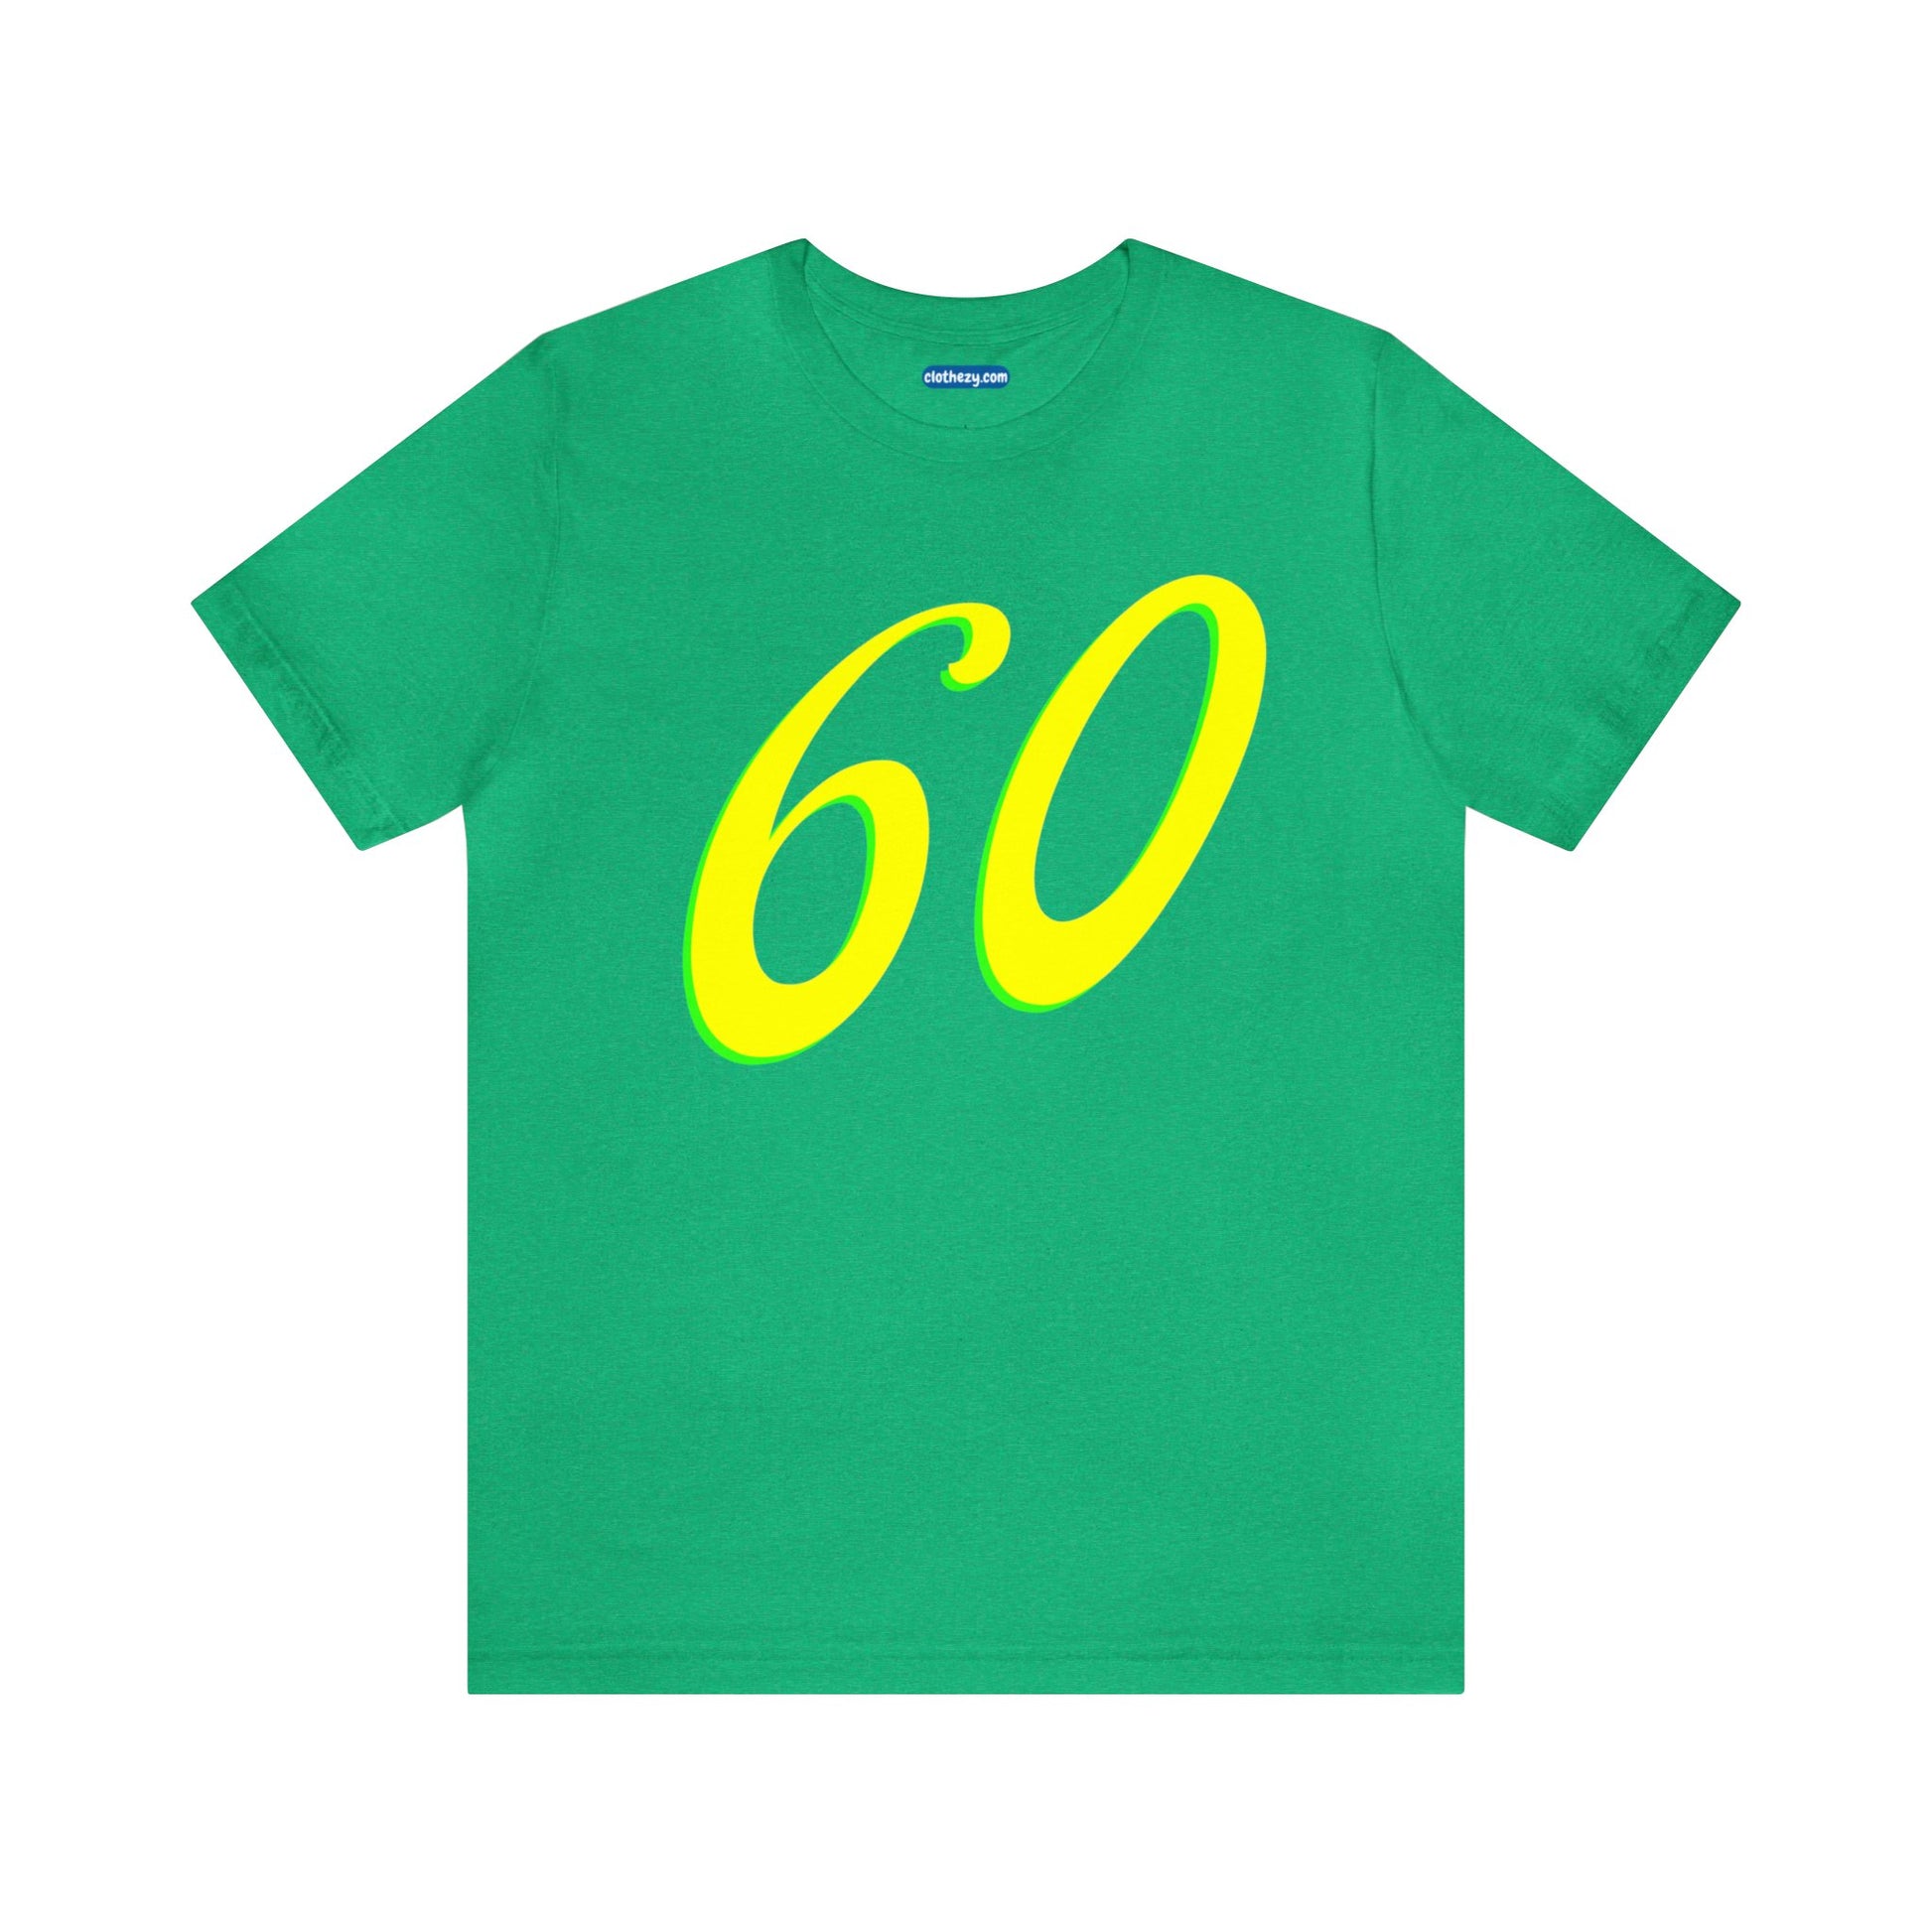 Number 60 Design - Soft Cotton Tee for birthdays and celebrations, Gift for friends and family, Multiple Options by clothezy.com in Green Heather Size Small - Buy Now